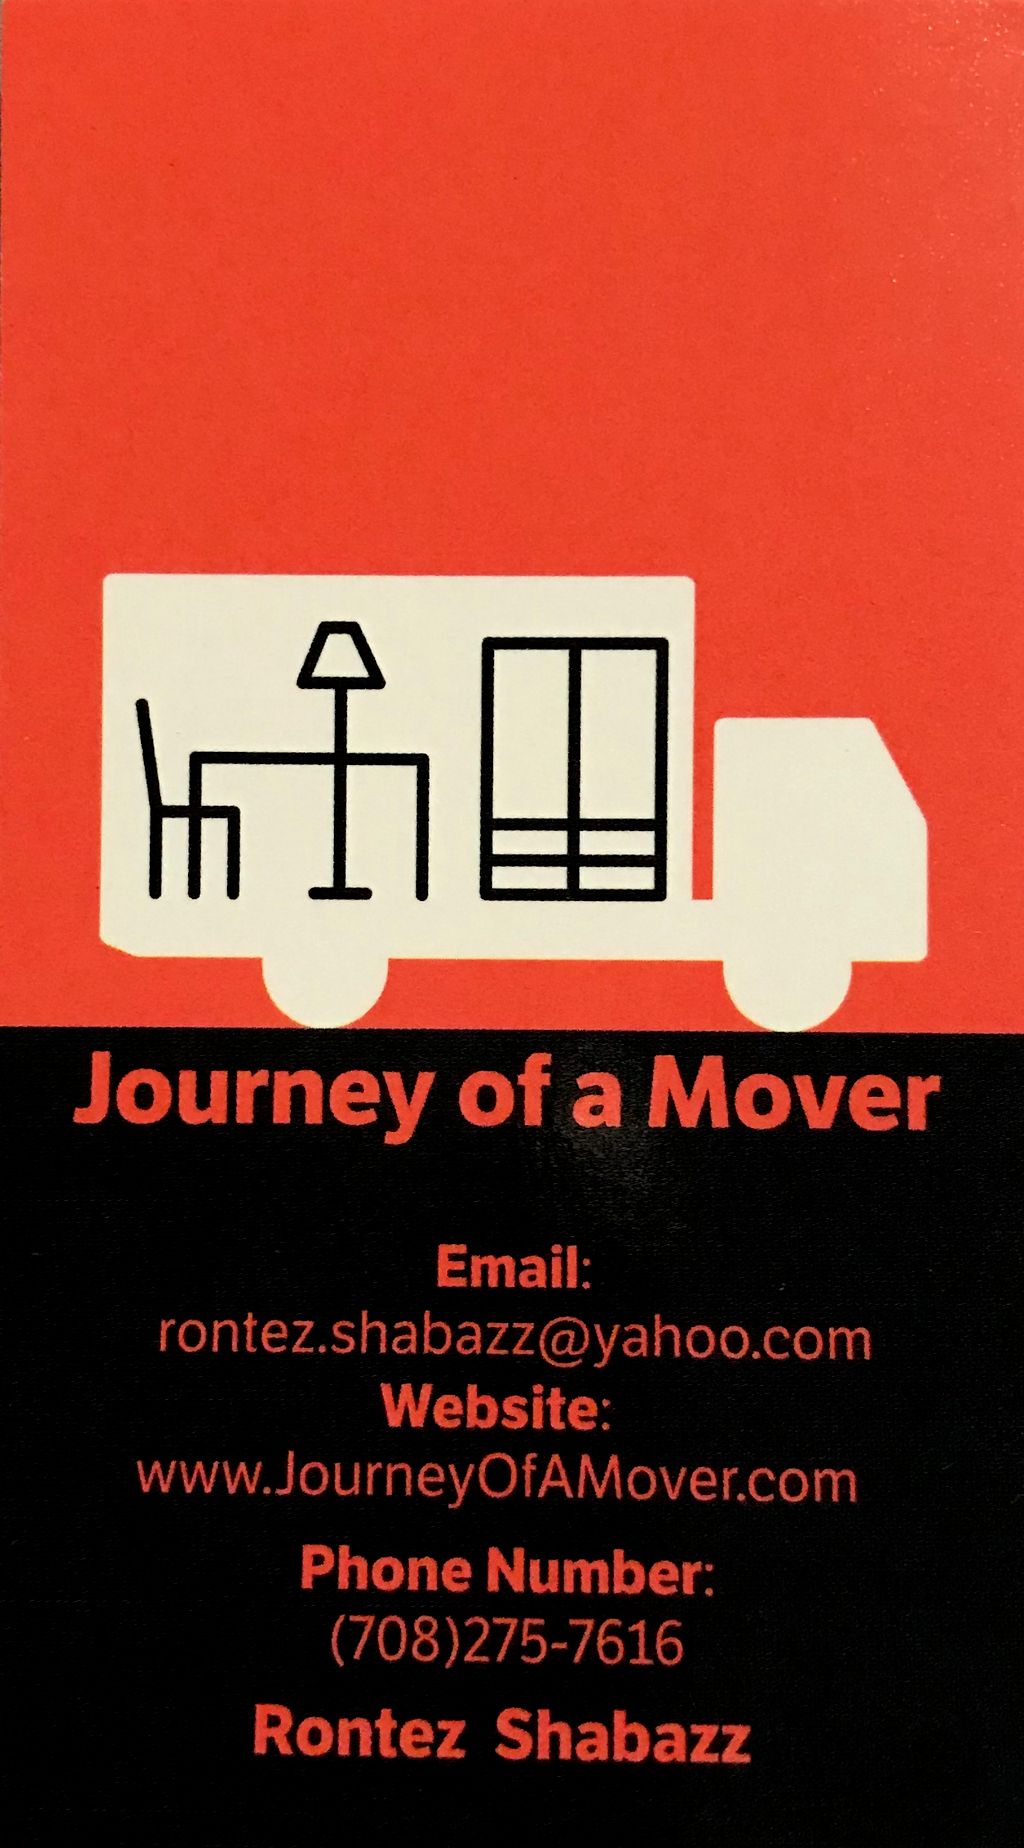 Journey of a Mover